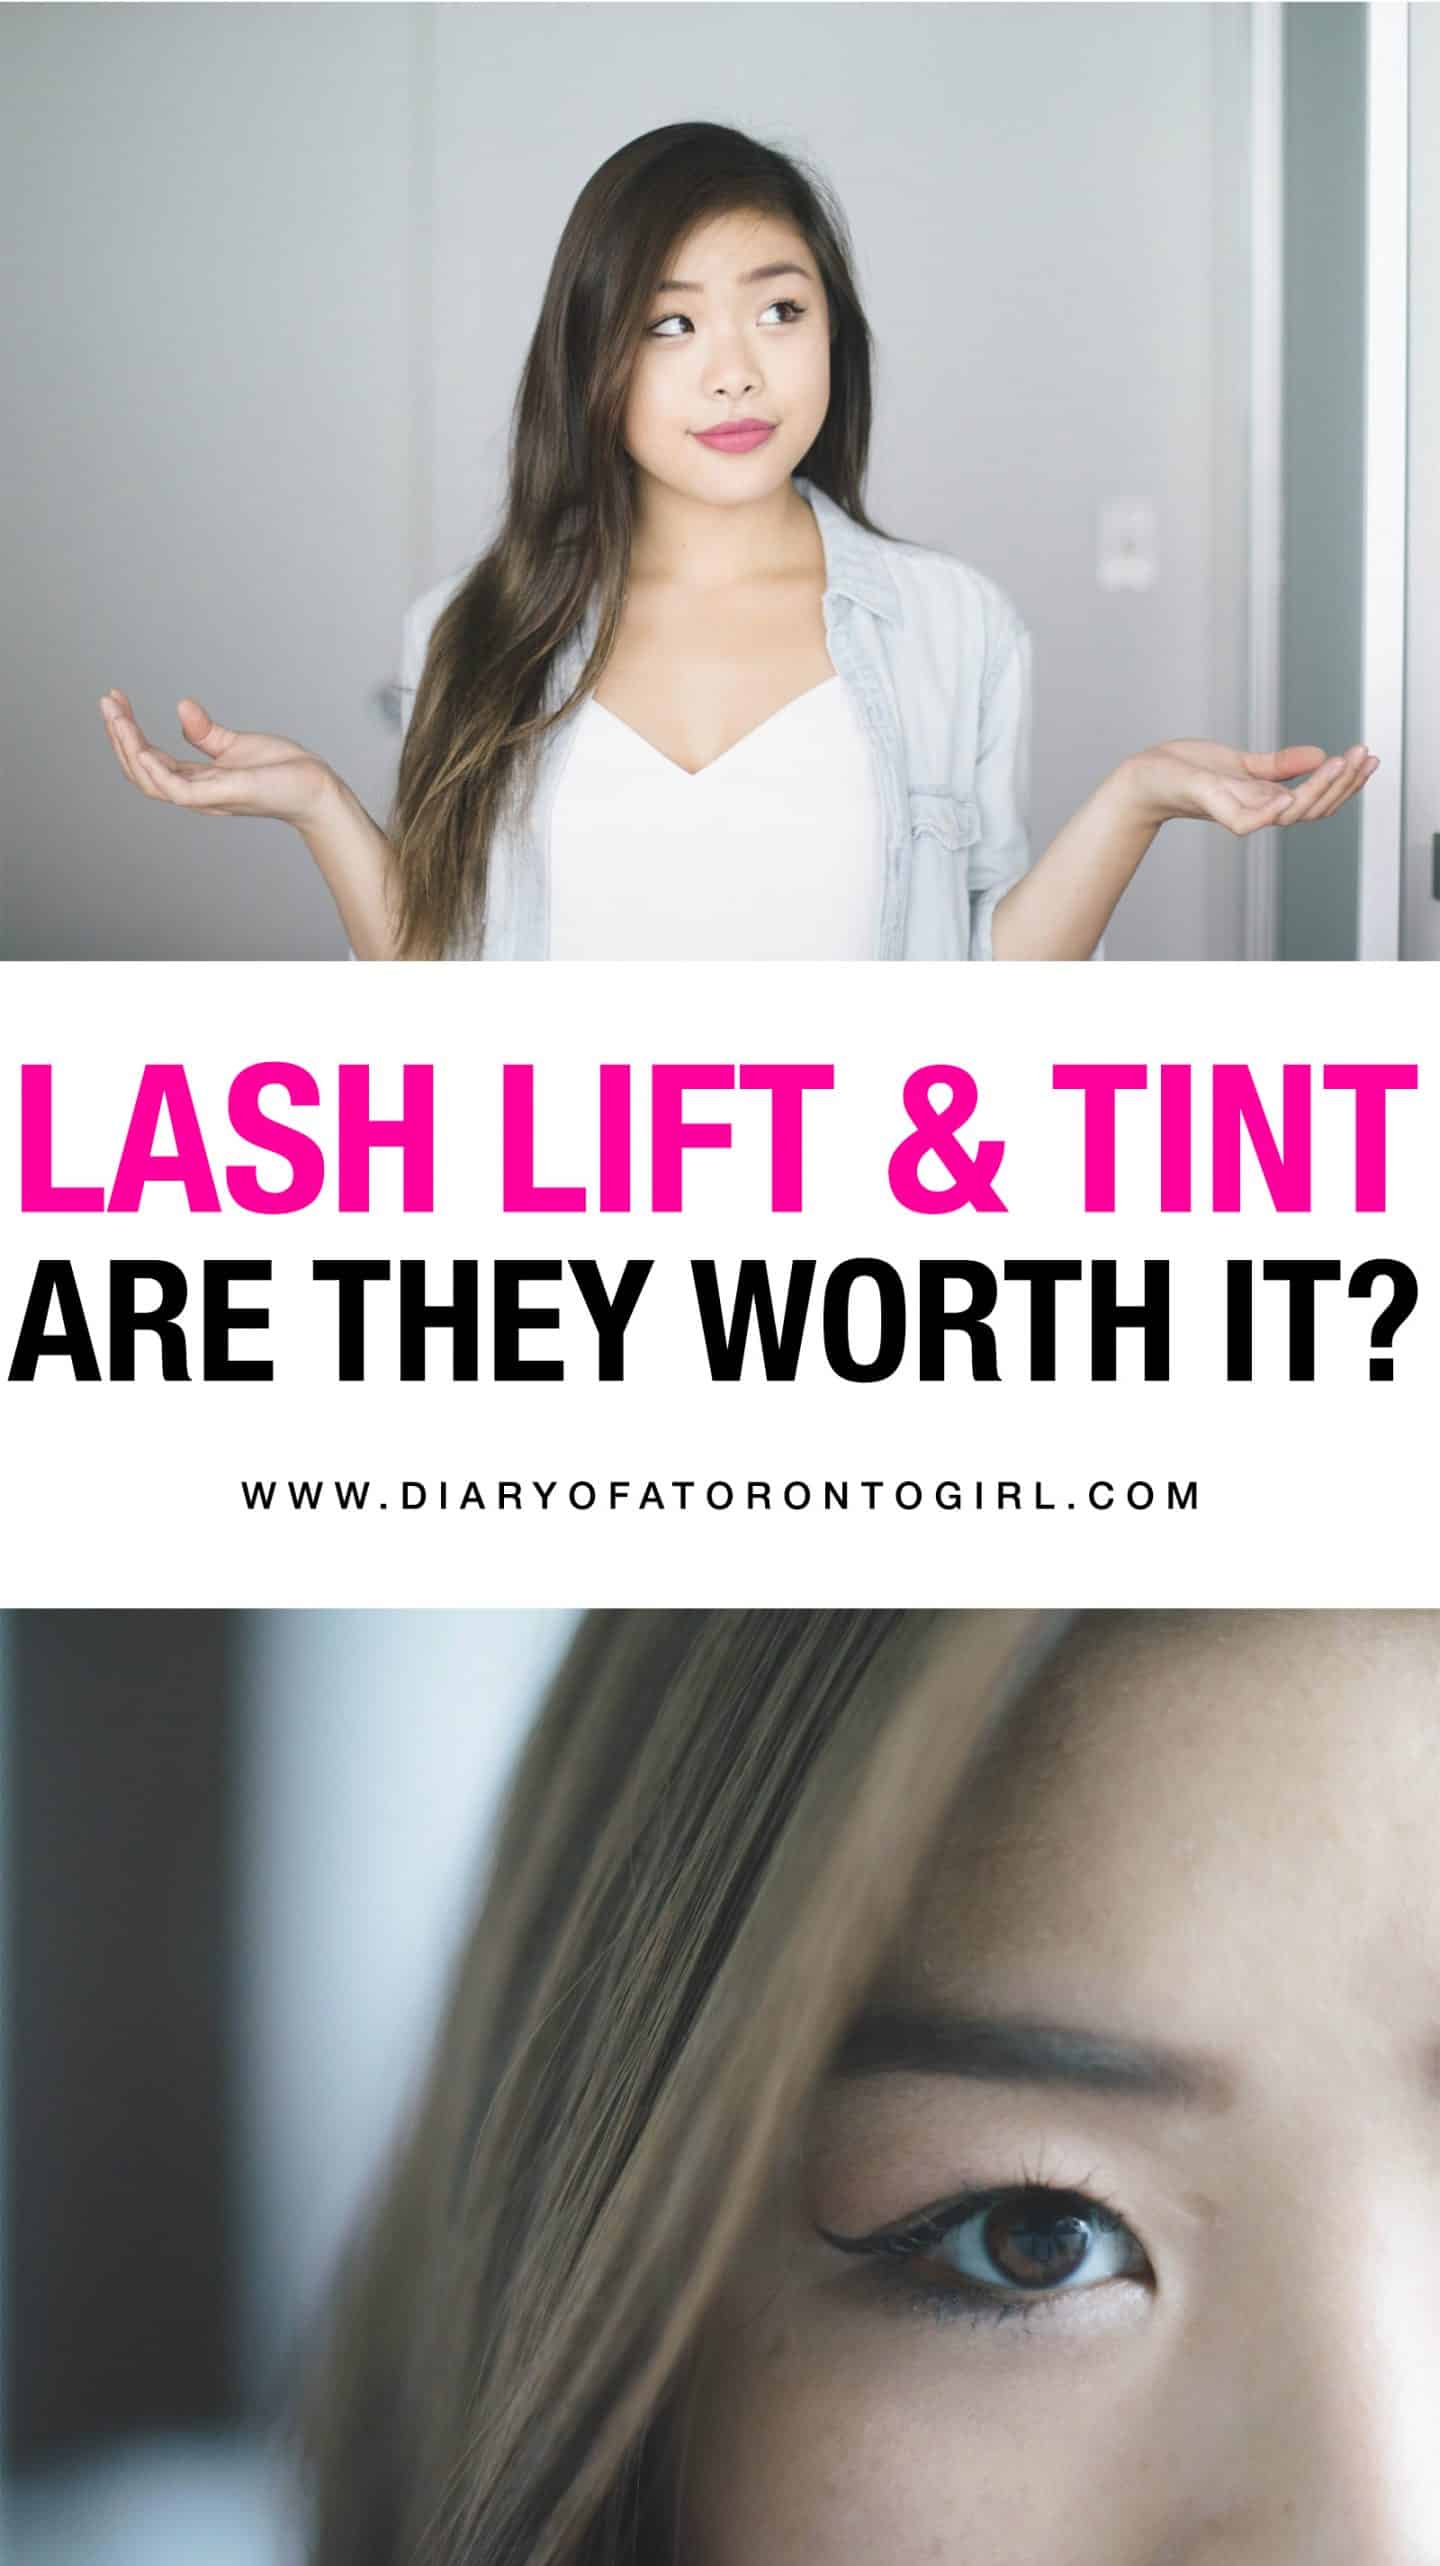 All about my lash lift and tint experience here in Toronto! A lash lift is a semi-permanent beauty procedure that keeps your eyelashes lifted for up to 8 weeks, so you don't have to curl your lashes.